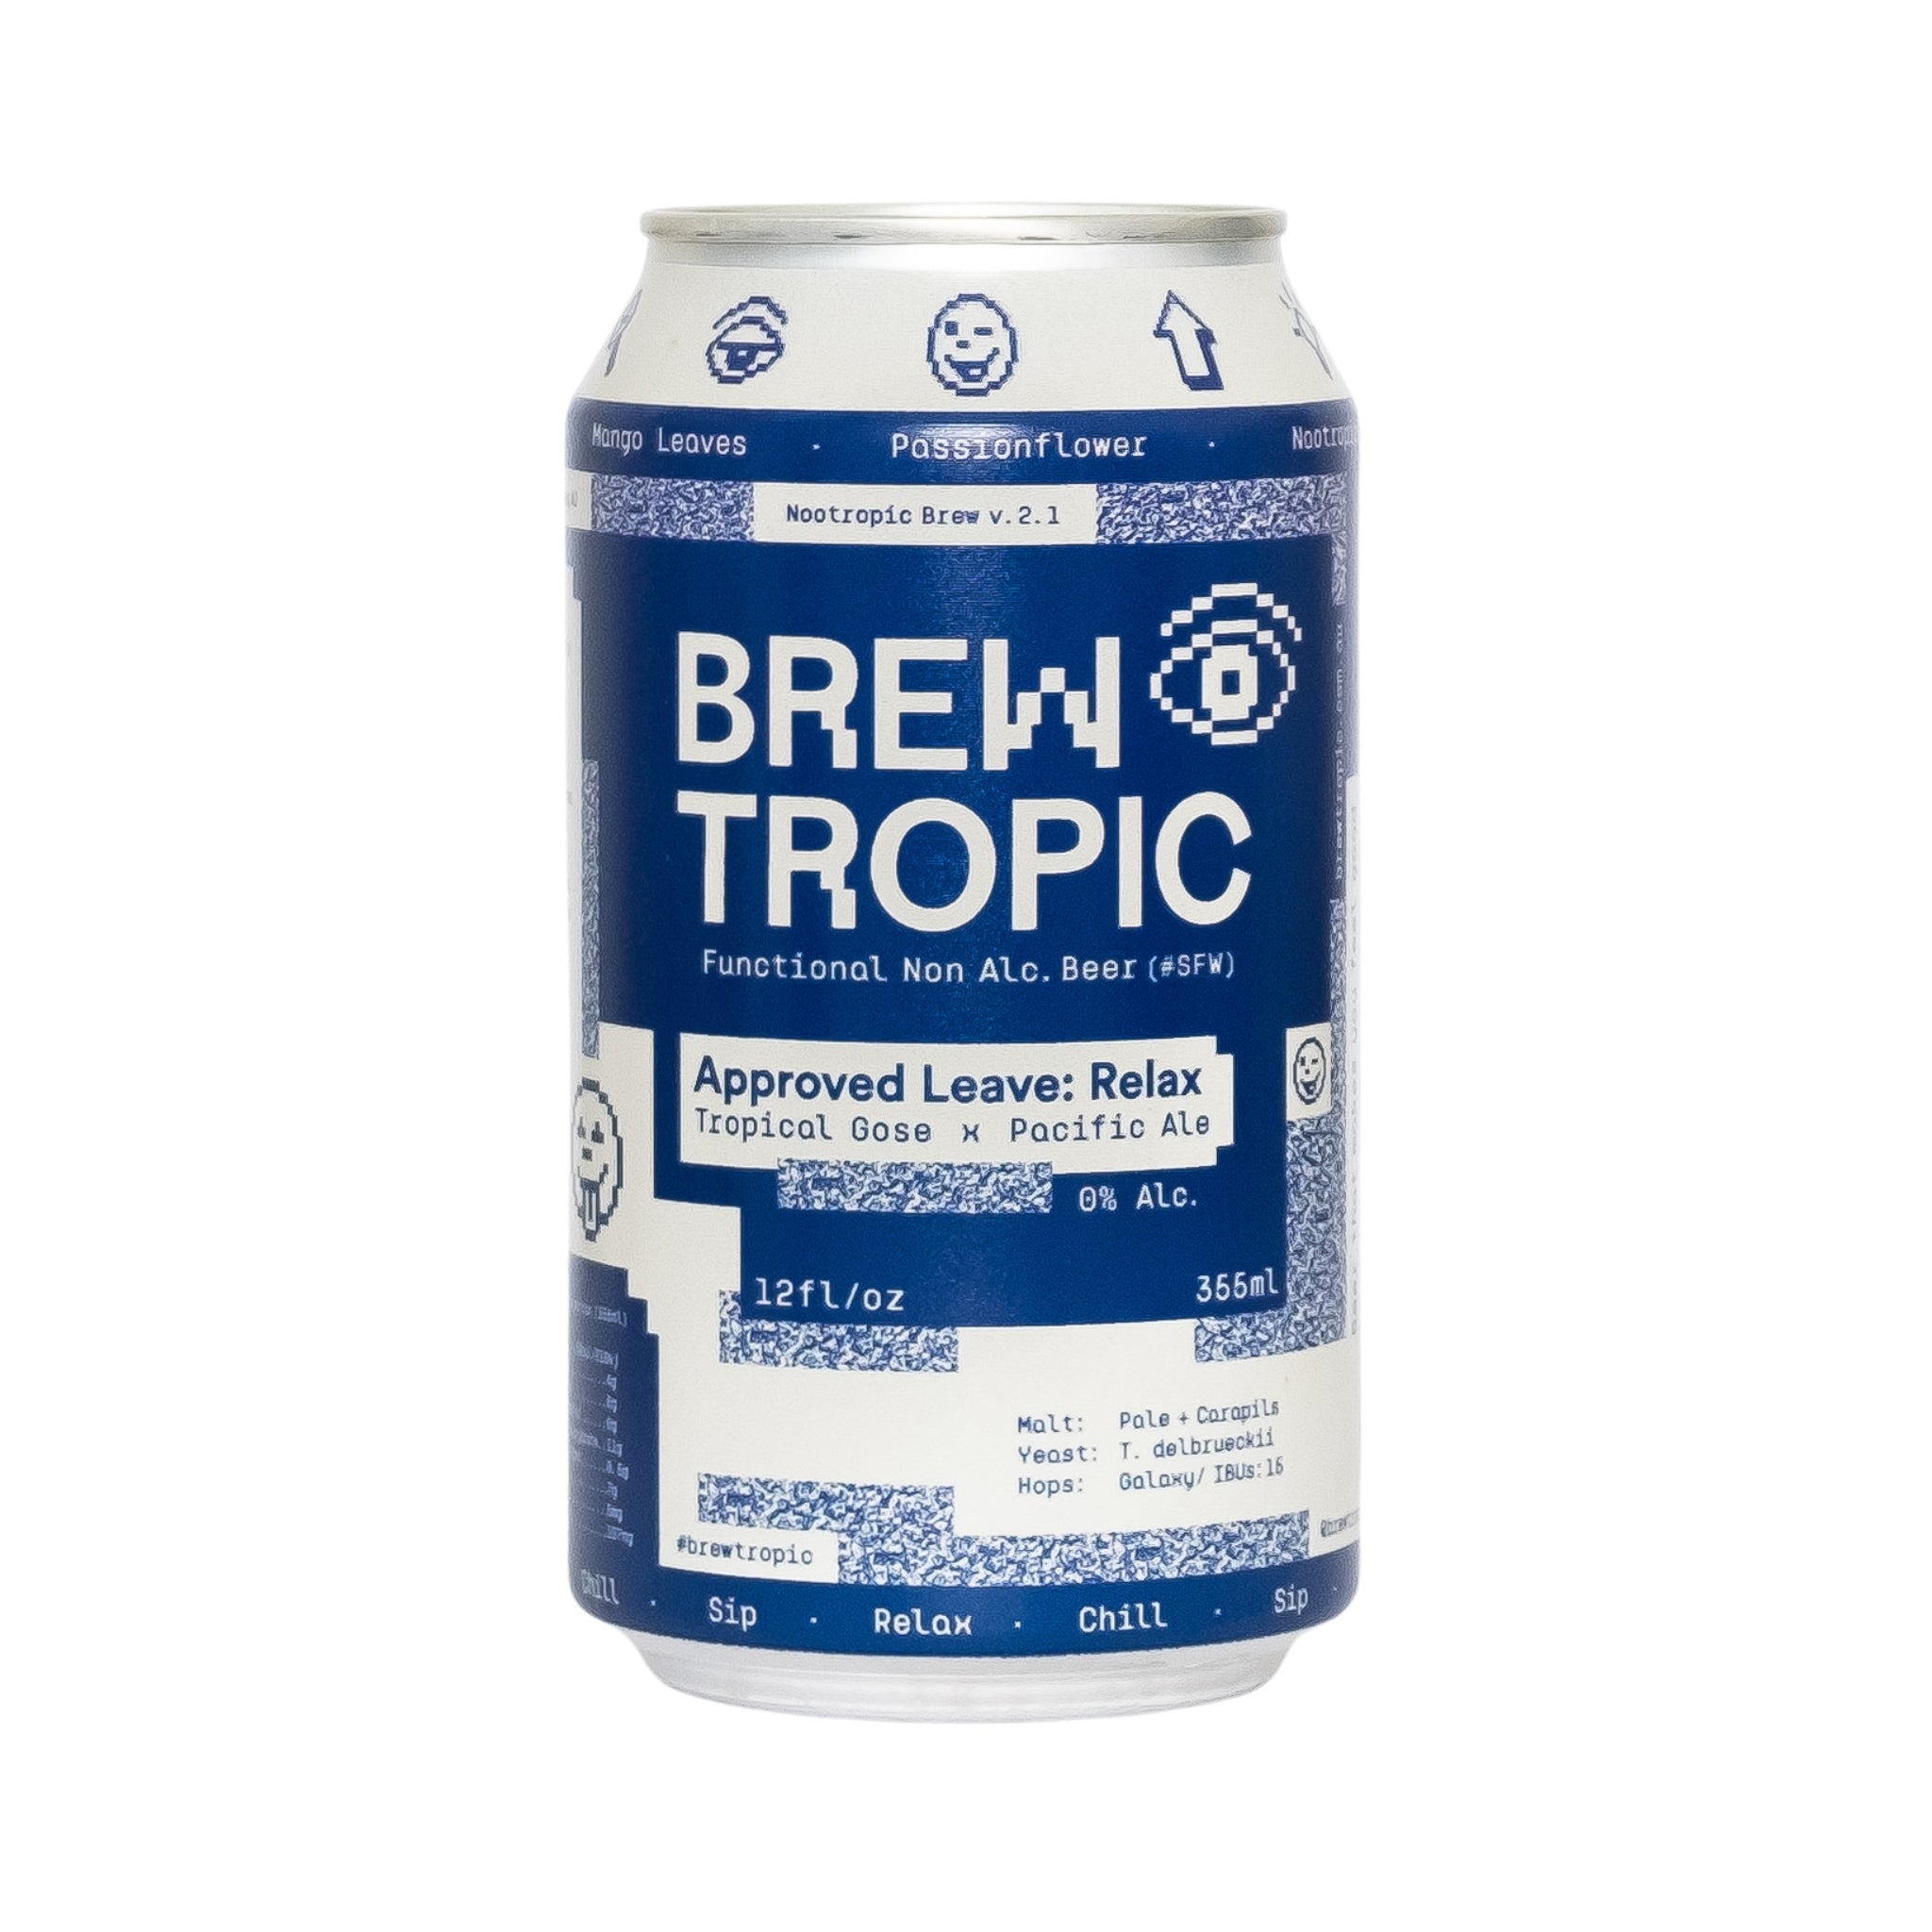 BREWTROPIC-Approved Leave-Drops-1-zerodrop